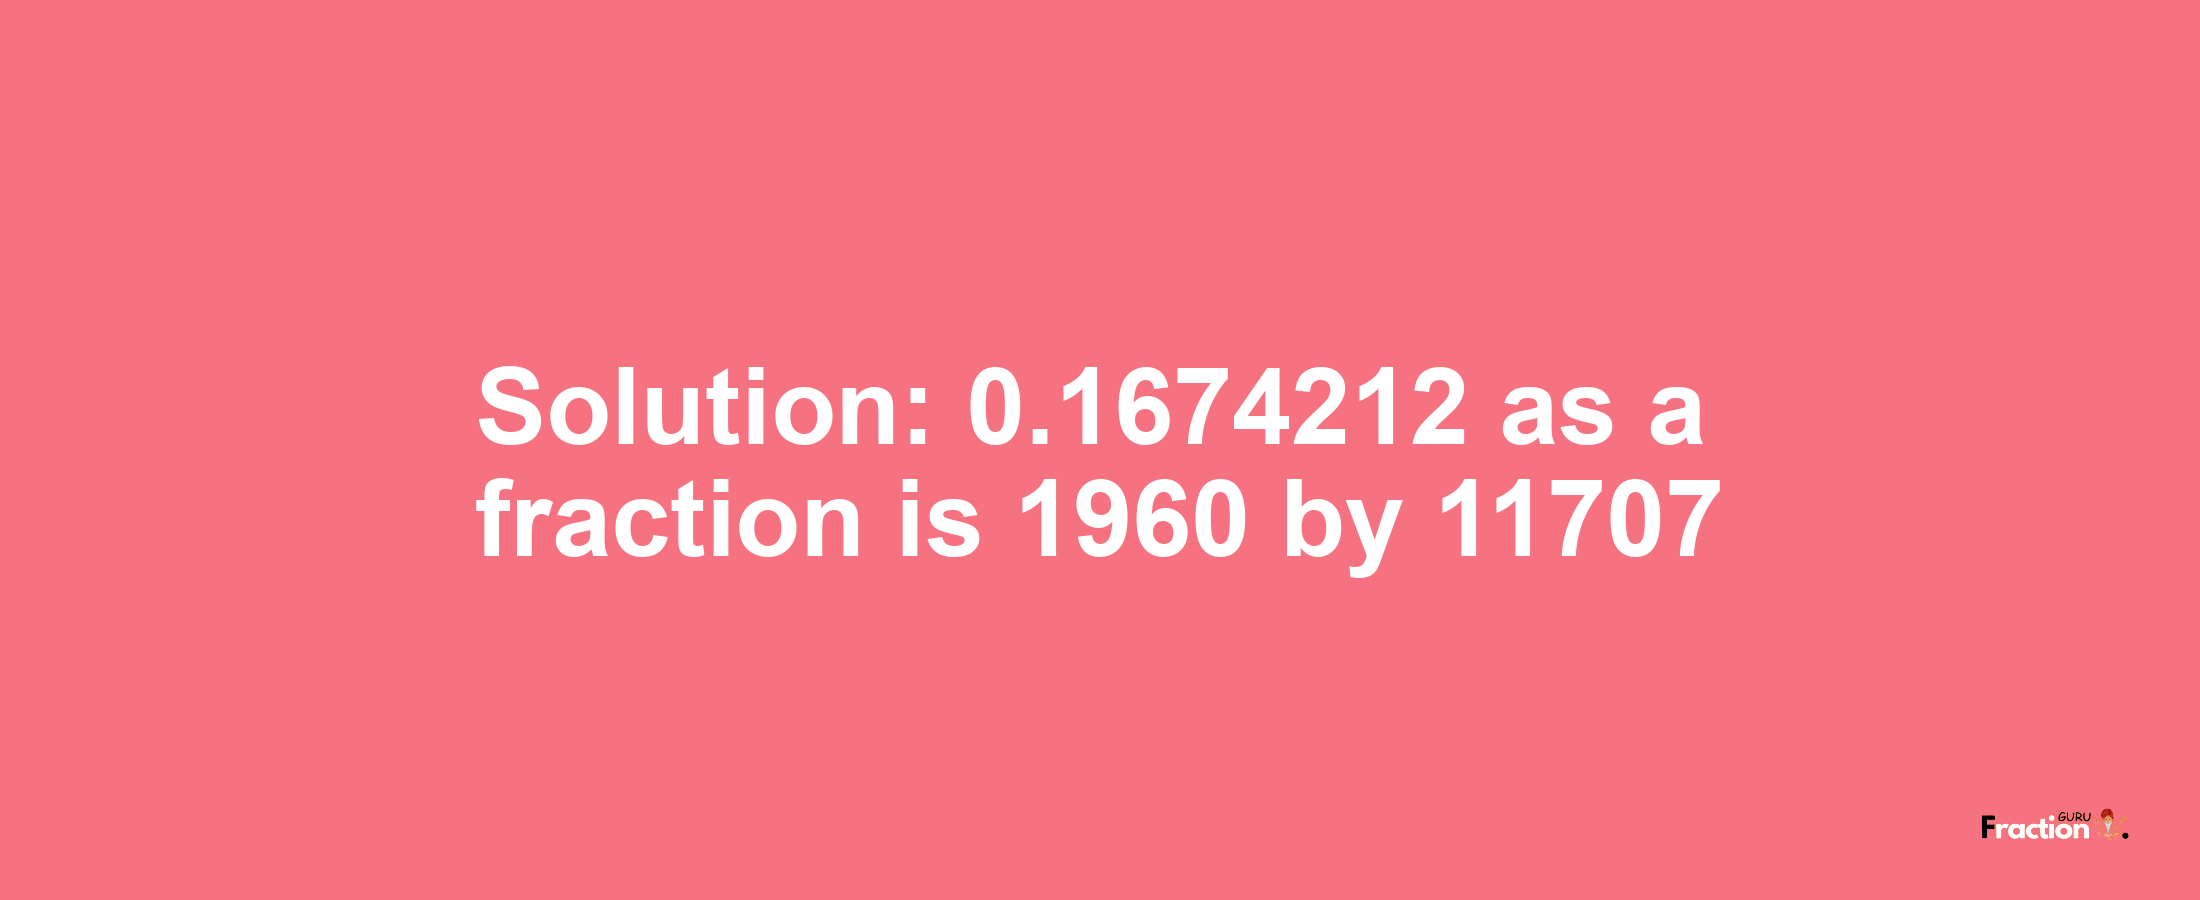 Solution:0.1674212 as a fraction is 1960/11707